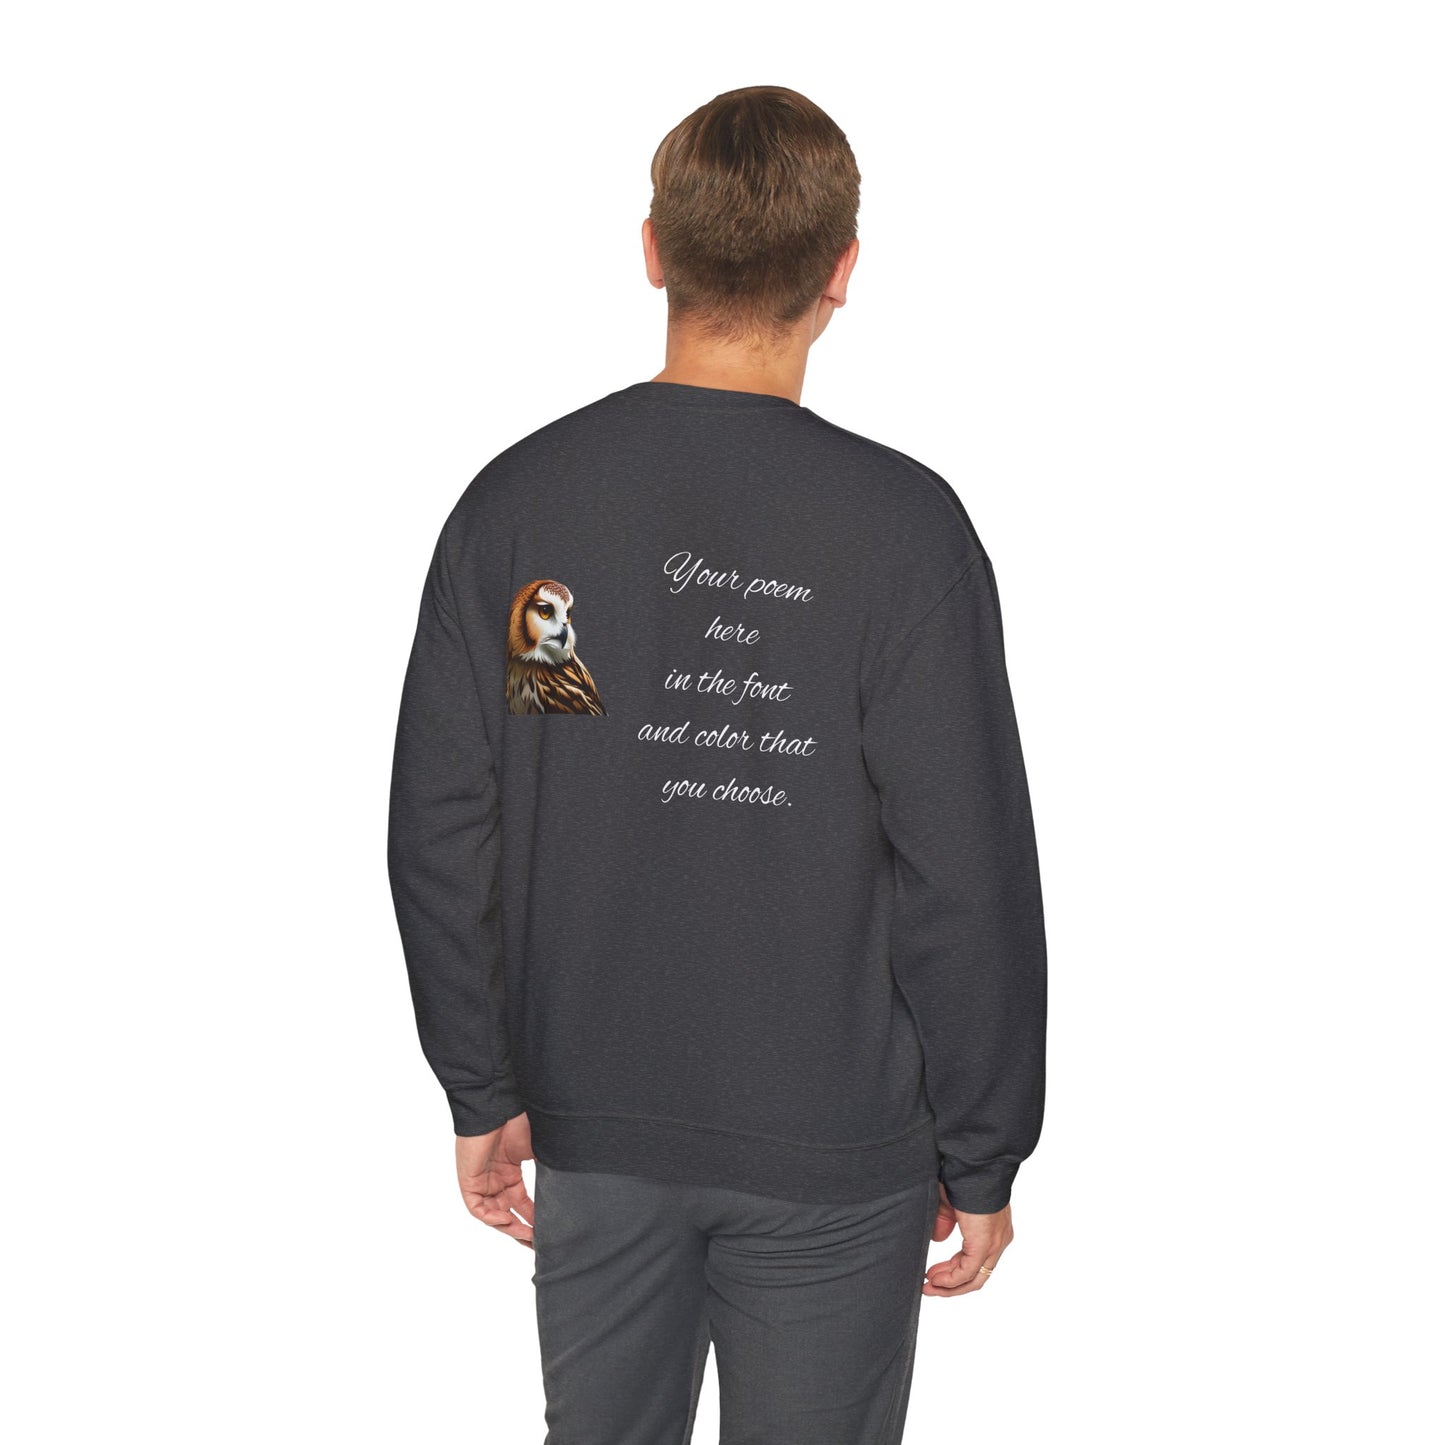 Your Poem On A Sweatshirt With An Owl